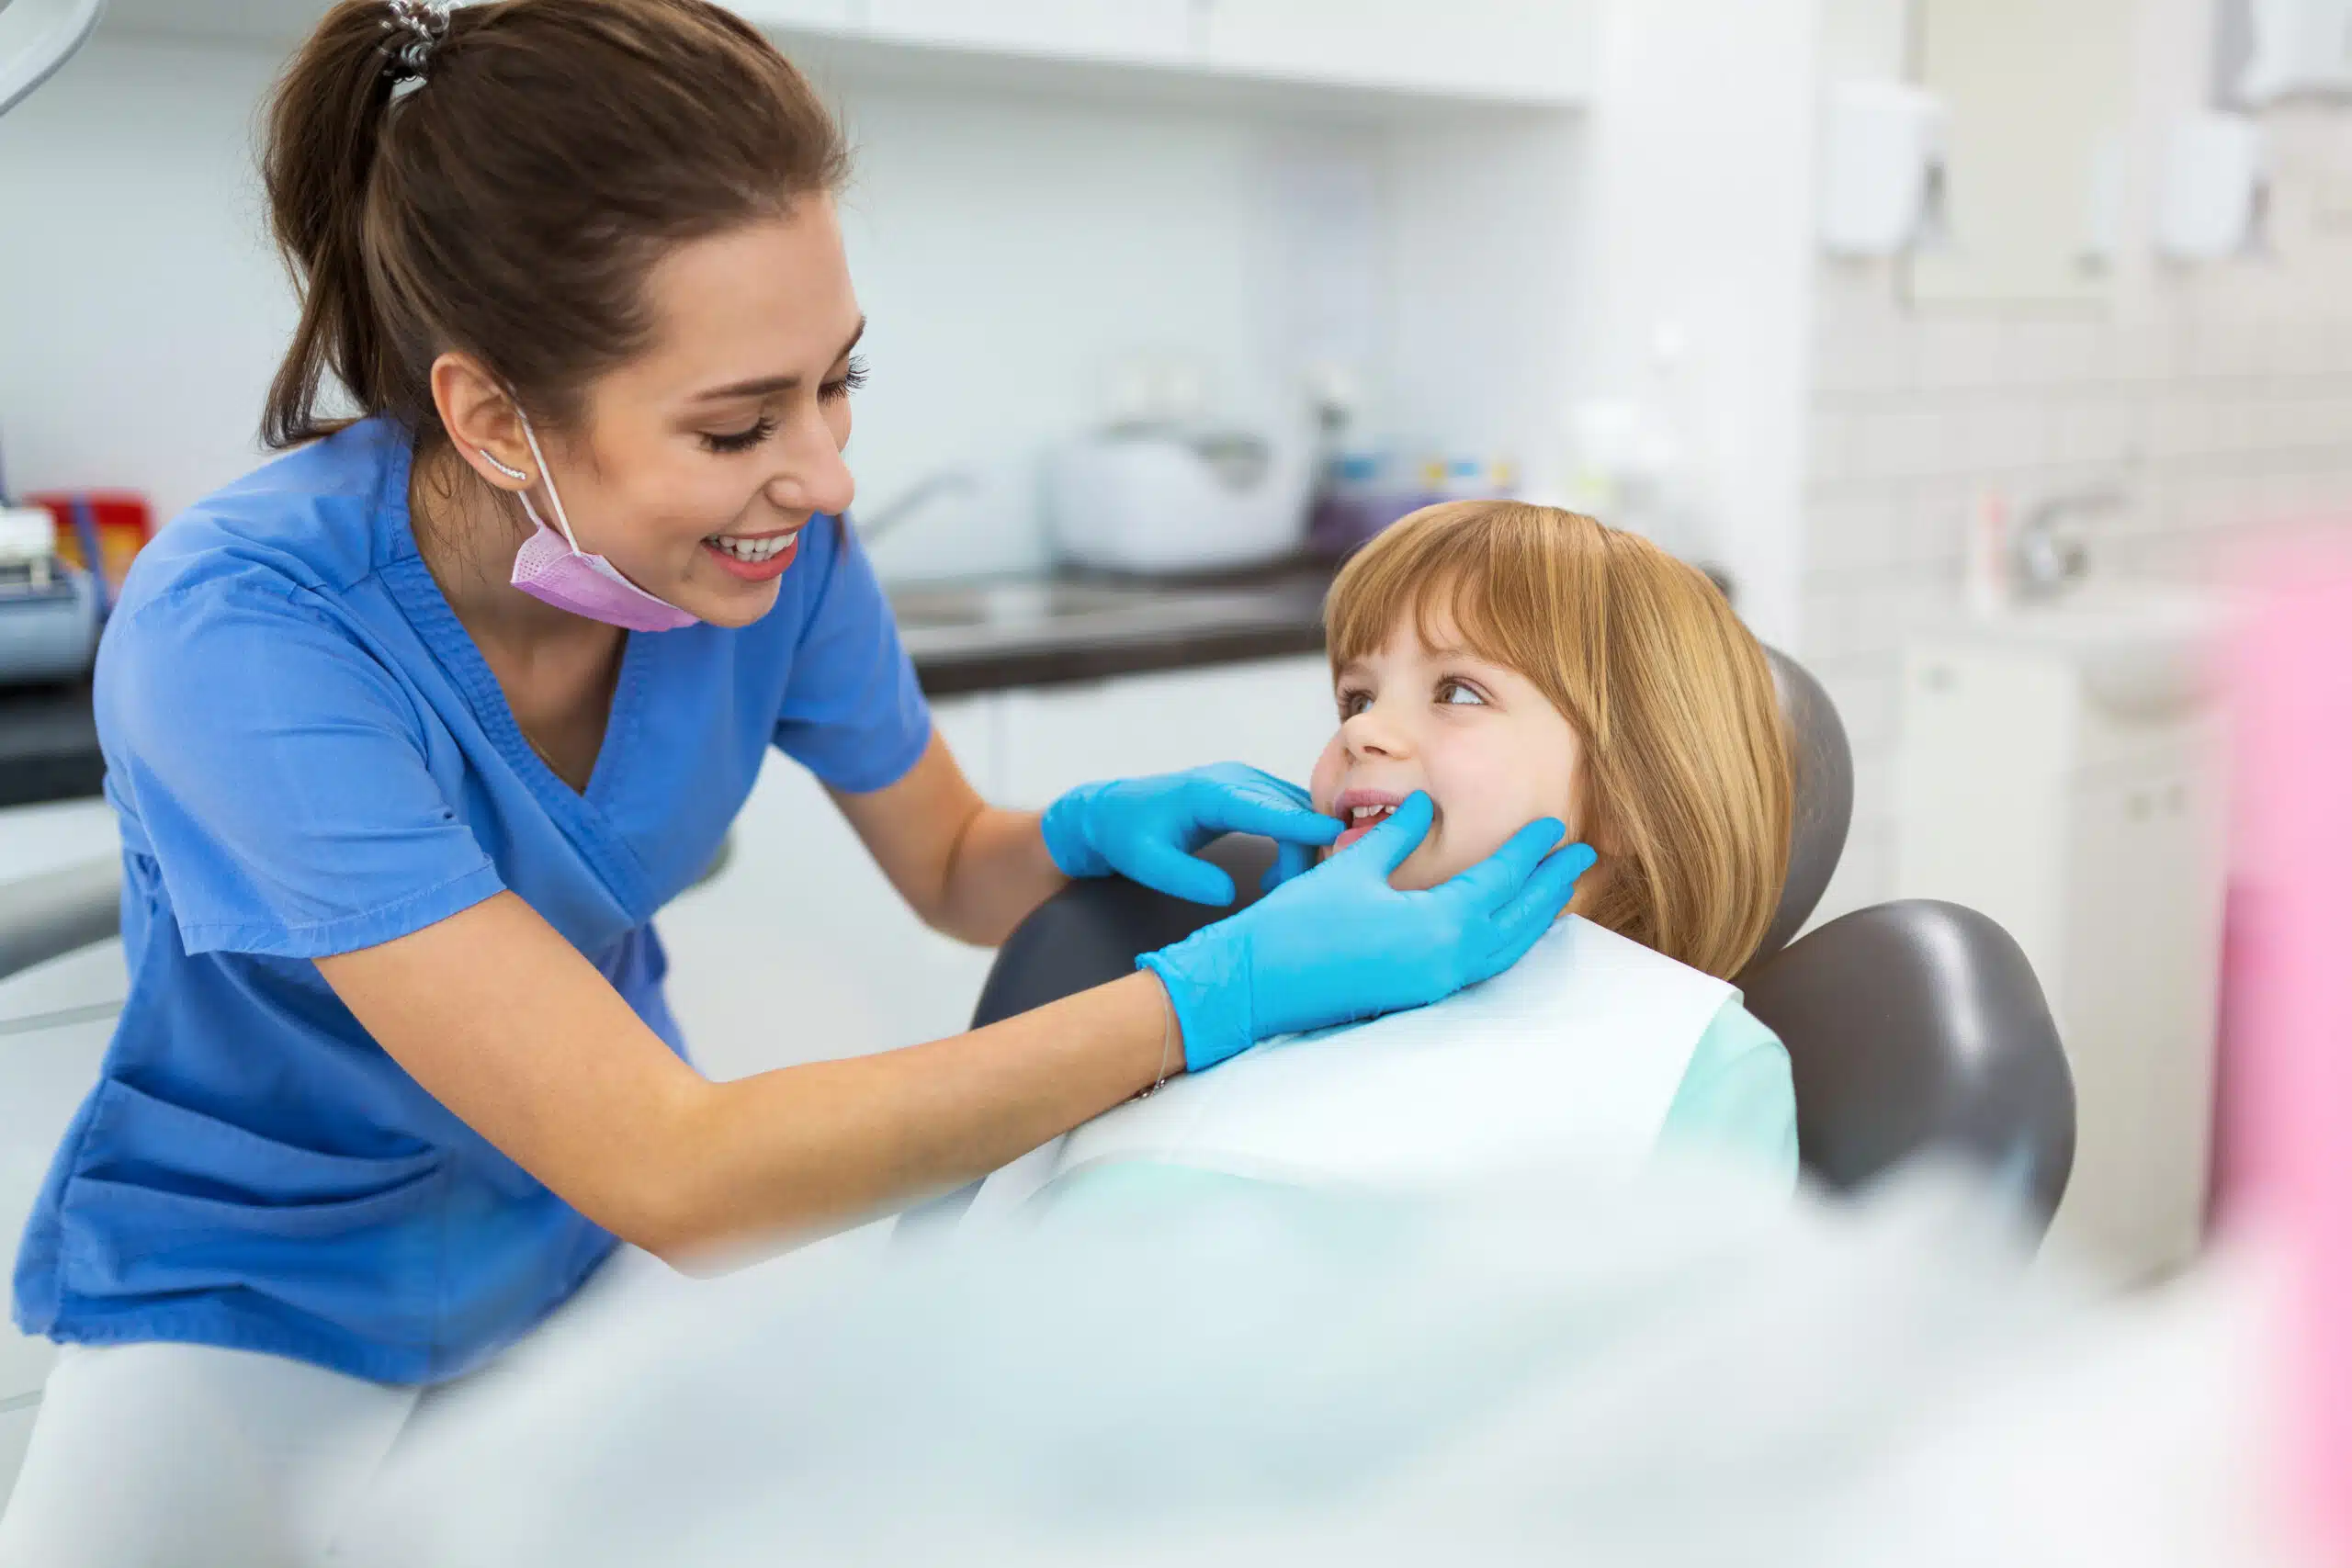 A frenectomy is a minor surgical procedure that can improve speech and oral function by removing excess tissue in the mouth.<br><a href="https://adelbergpediatricdental.com/massapequa-park/services/frenectomy/">Learn more</a>